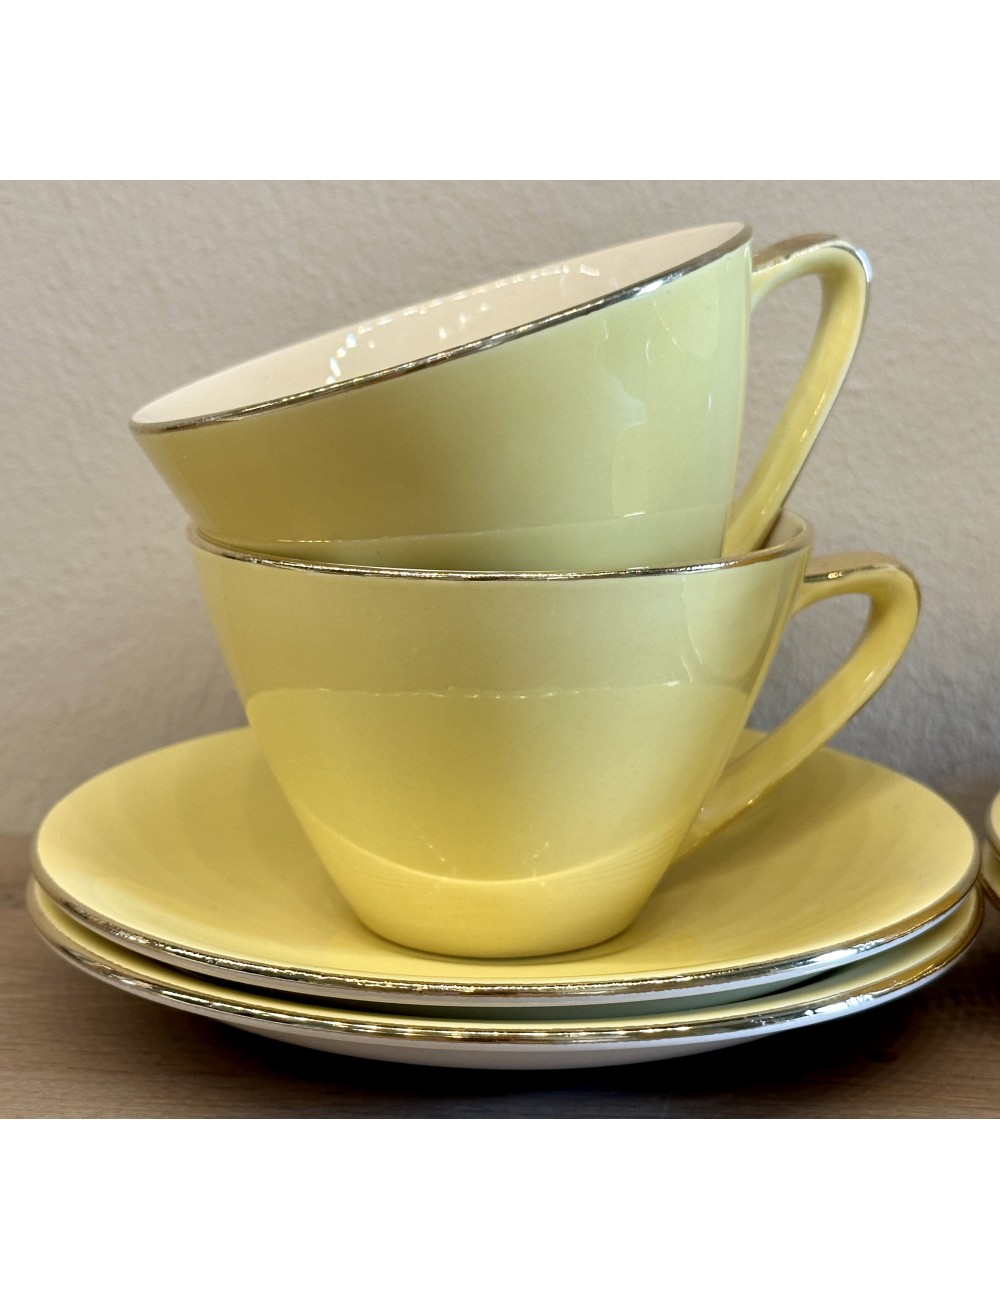 Cup and saucer - Boch - model SATURN/MIAMI (1957-1962) - décor in ochre yellow with gold handle